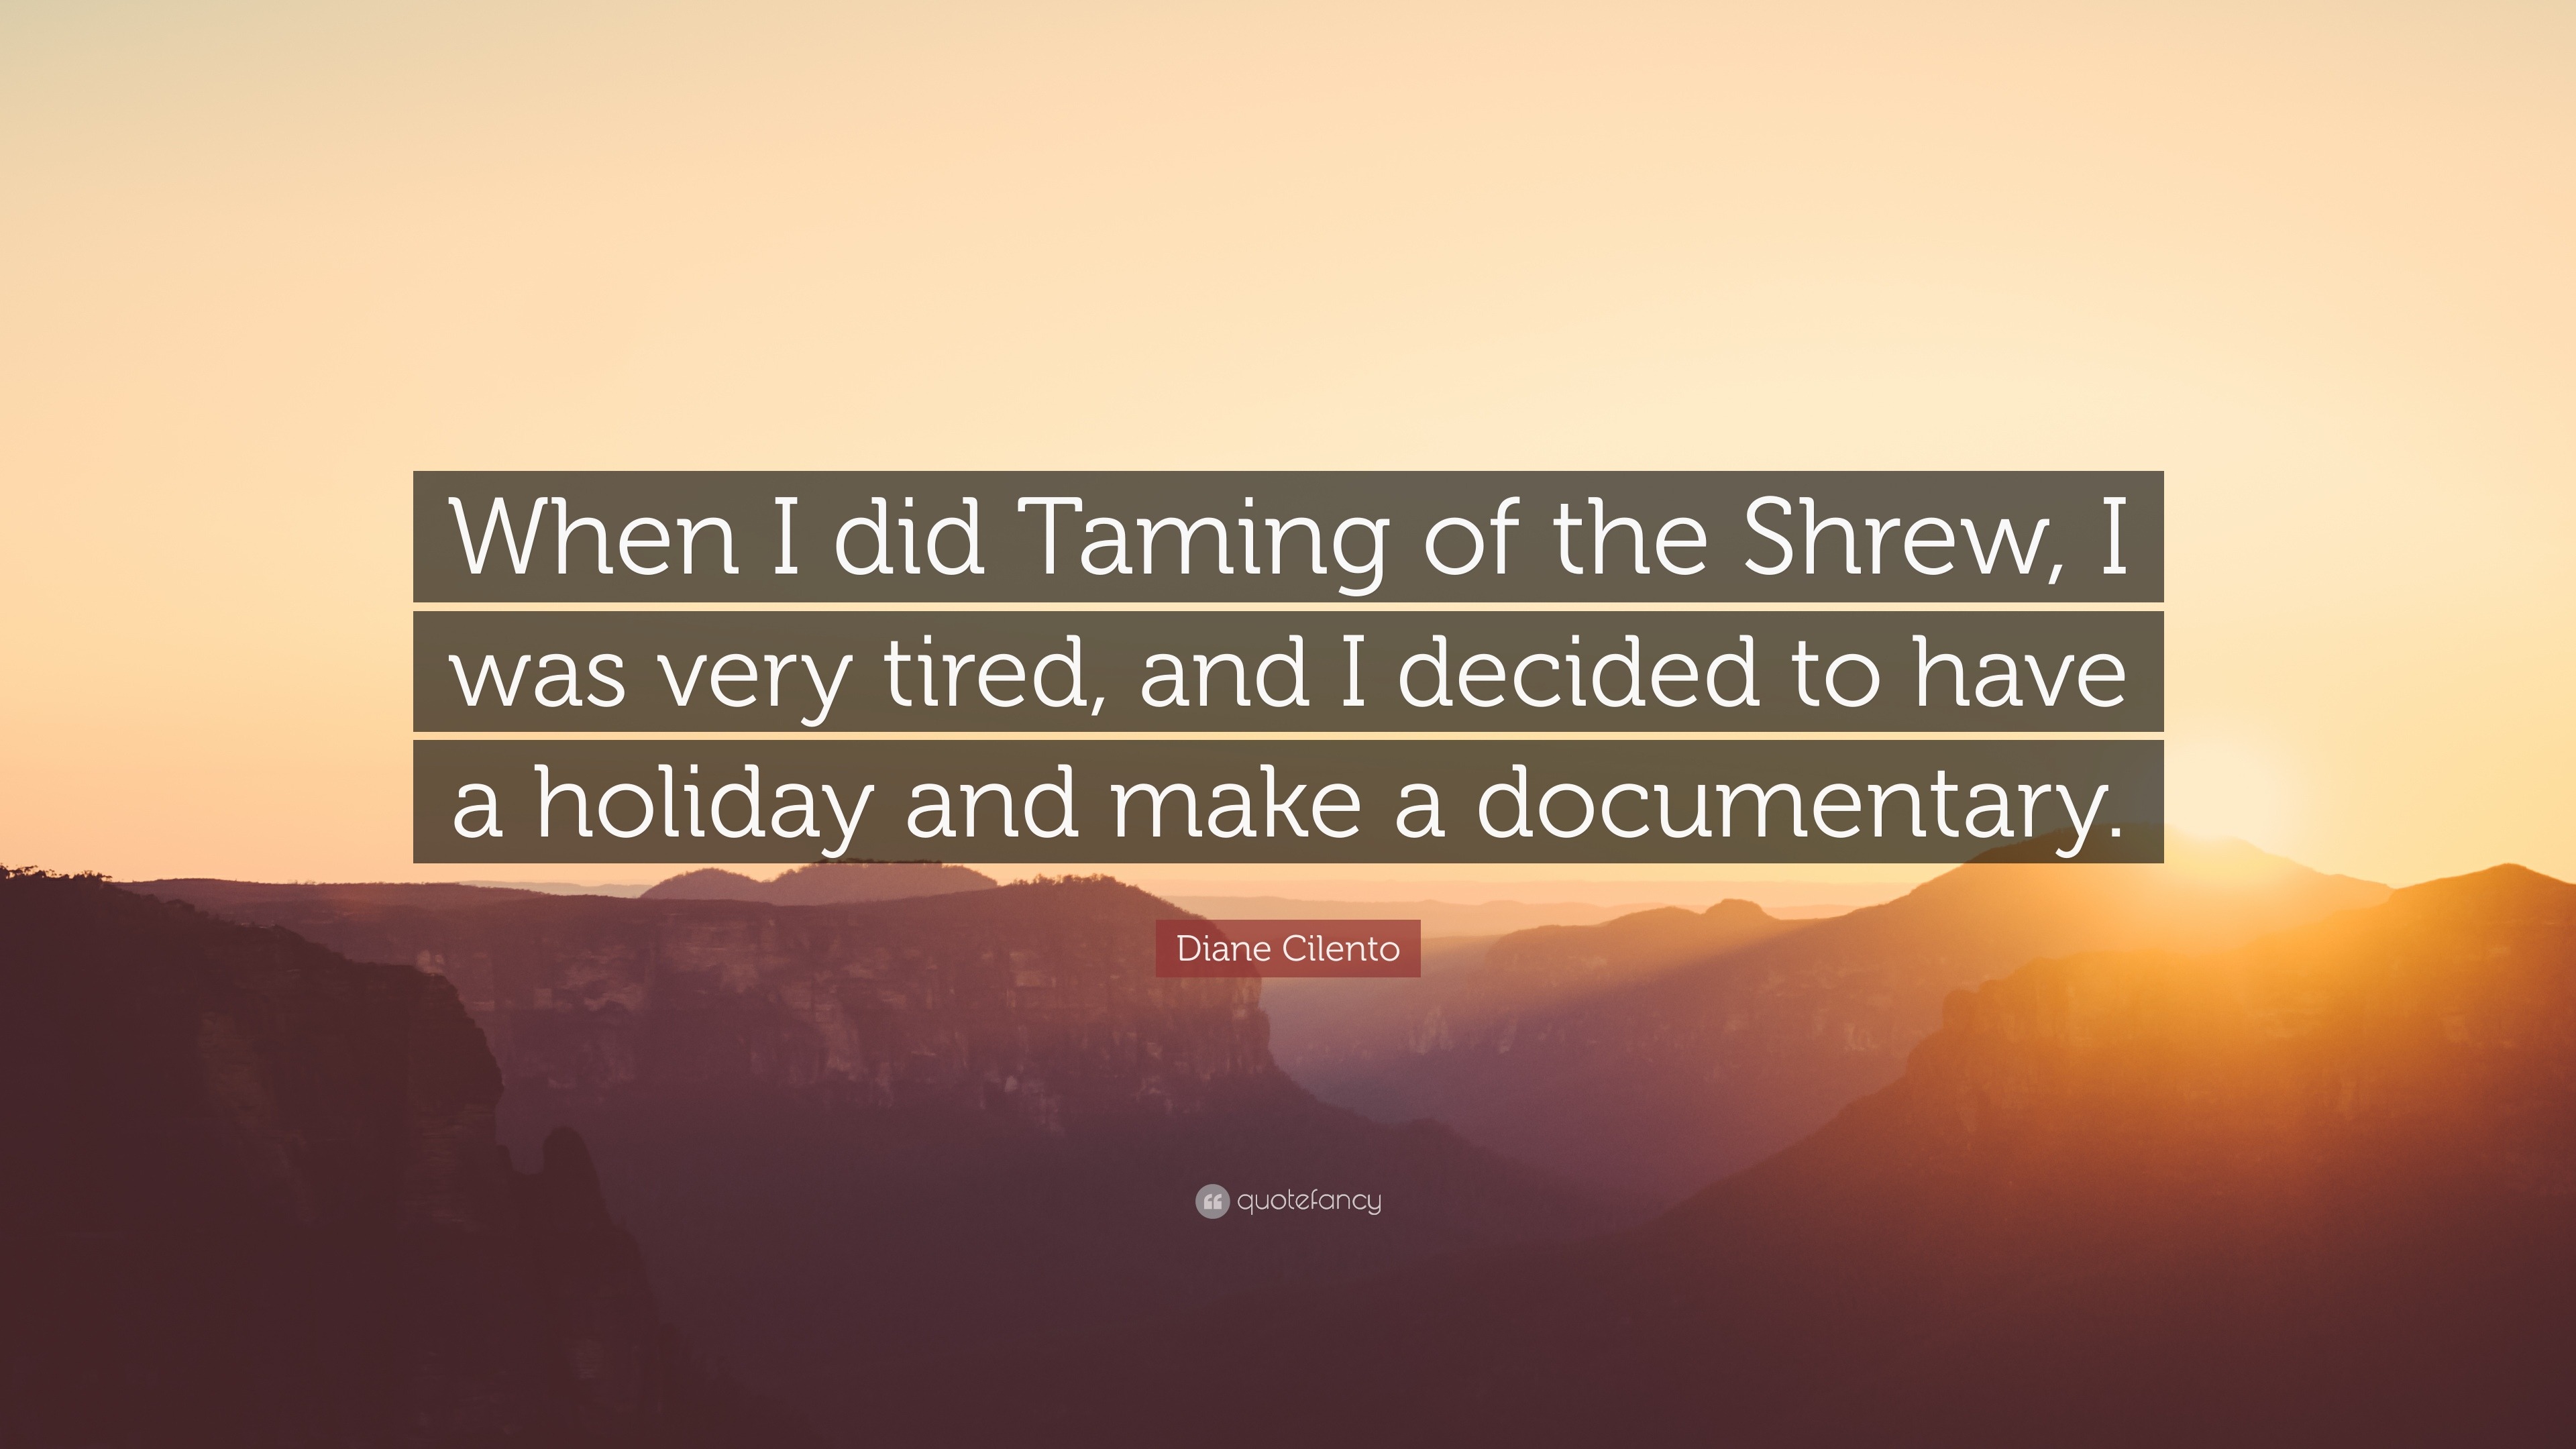 😀 Taming the shrew quotes. The Taming of the Shrew Movie Quotes. 2019-01-09